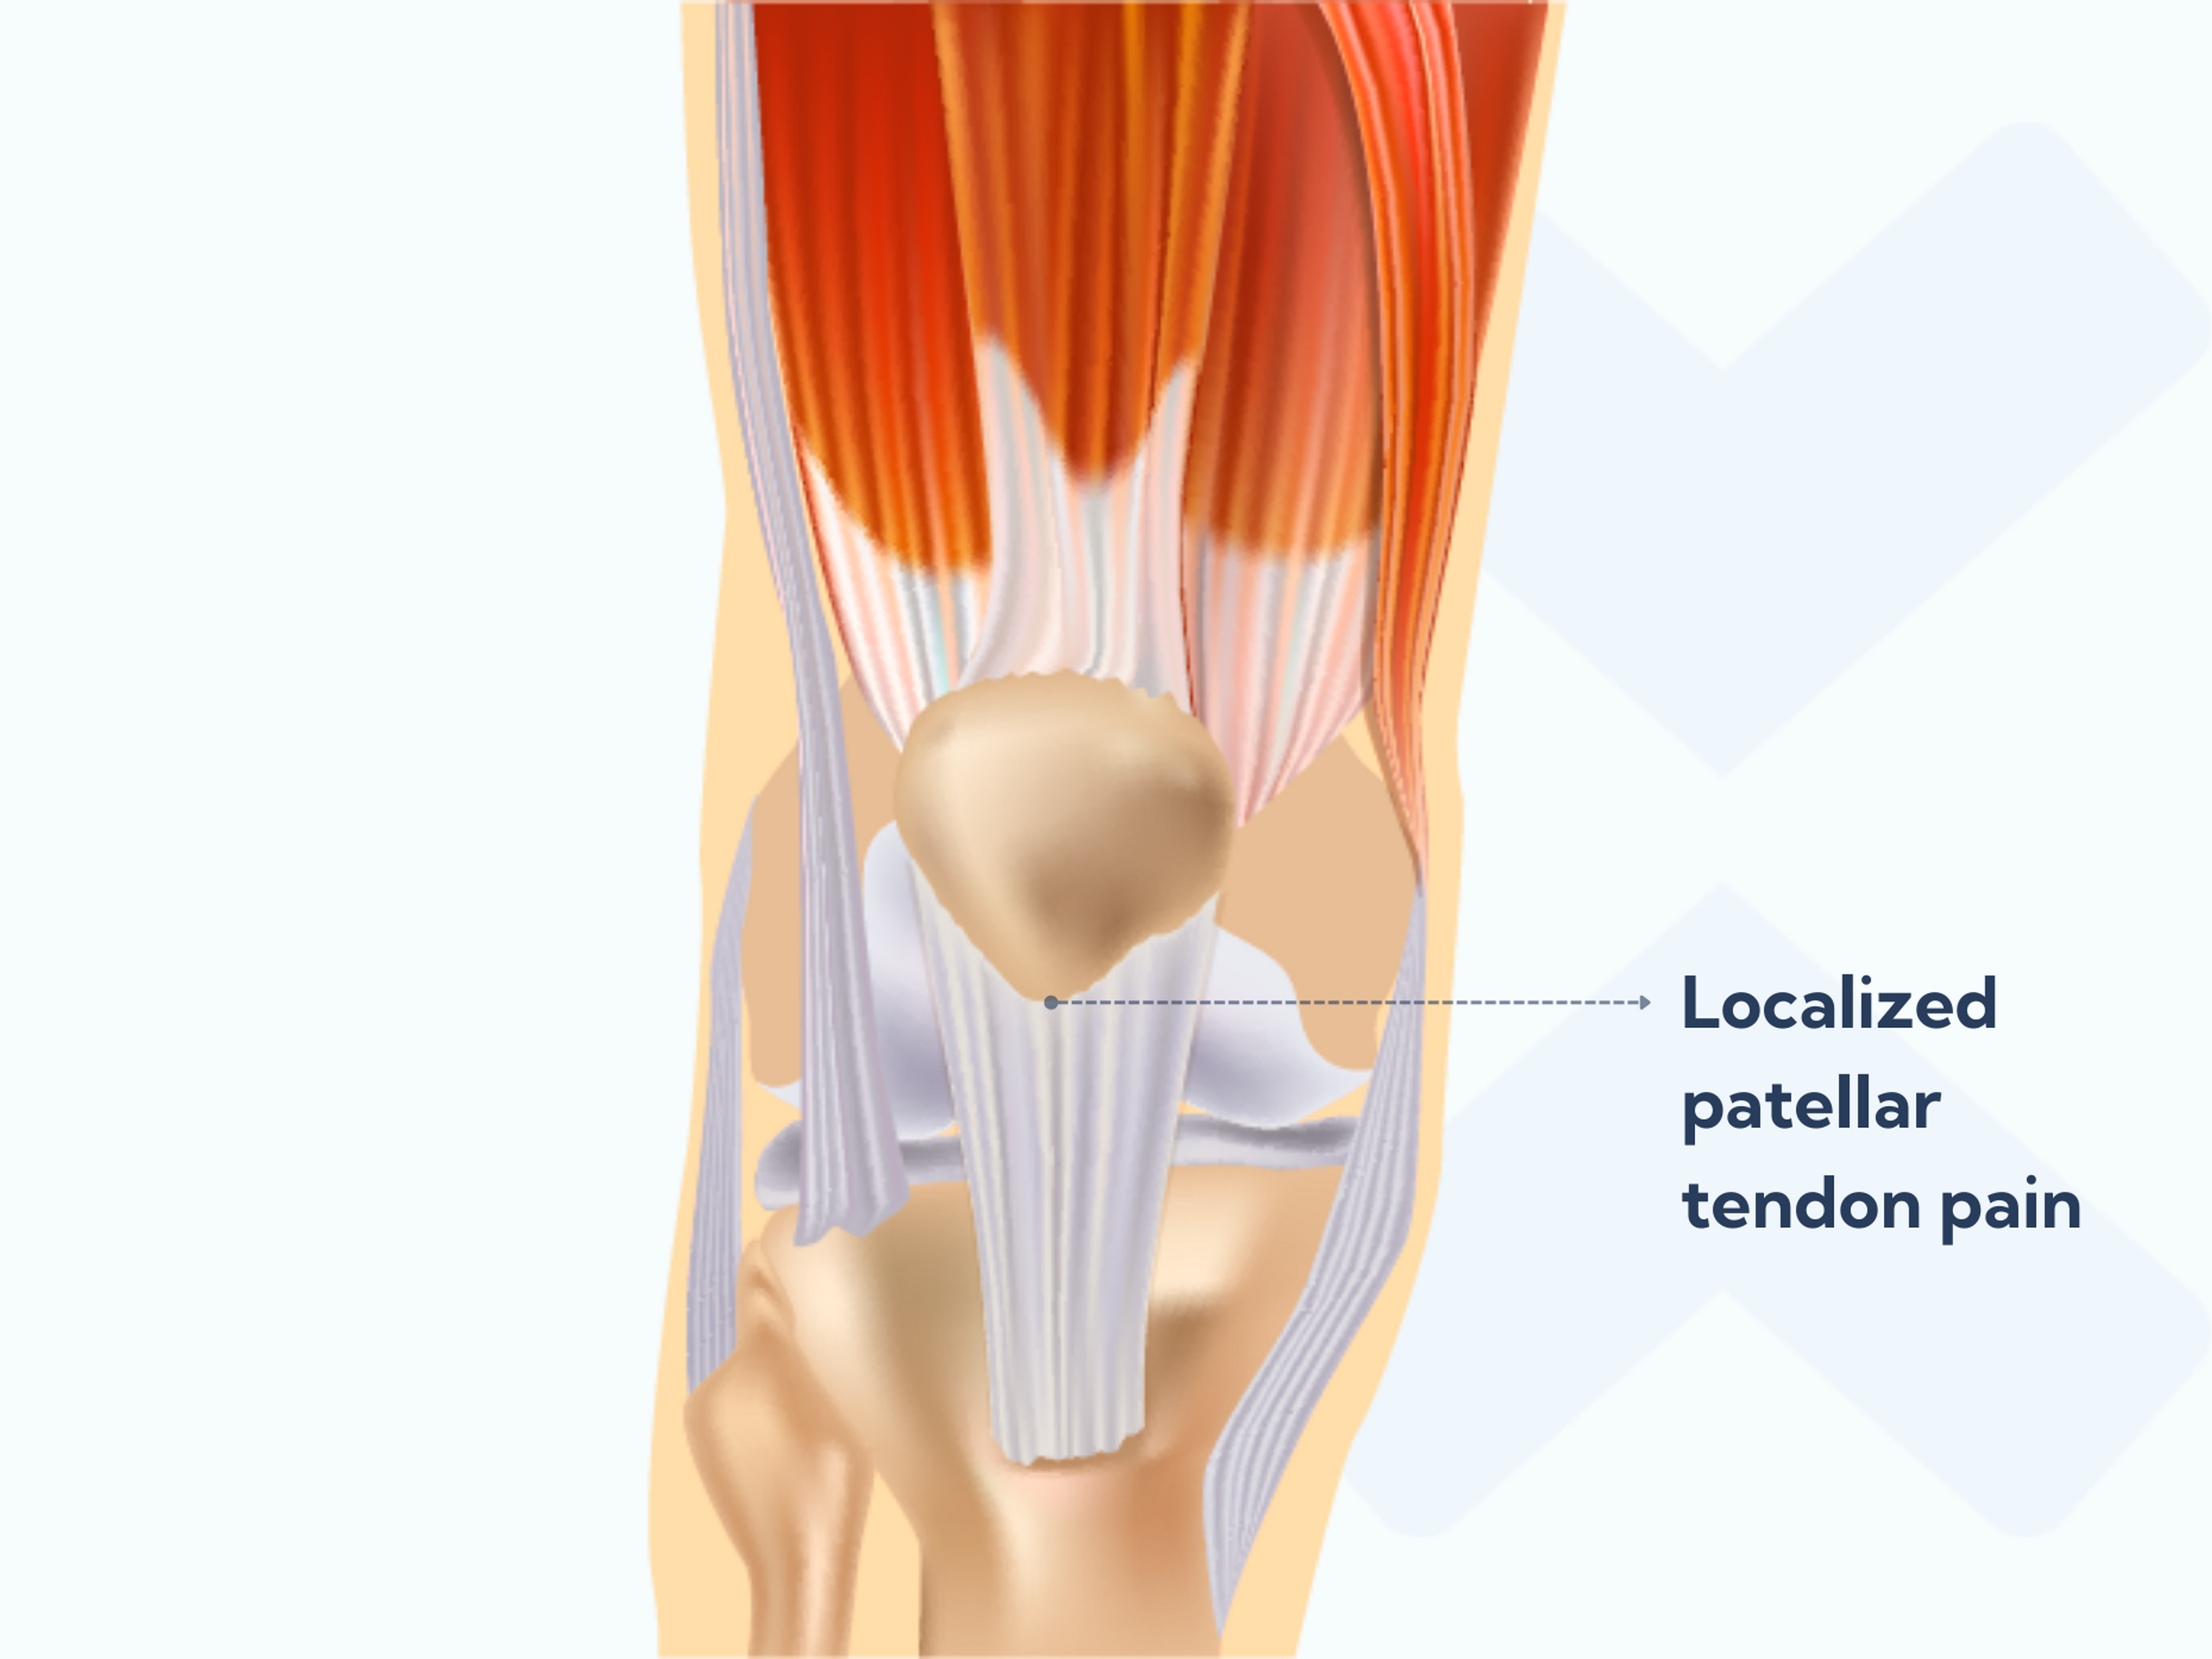 When you have patellar tendonitis the pain is localized to the patellar tendon, most commonly where it attaches to the kneecap.